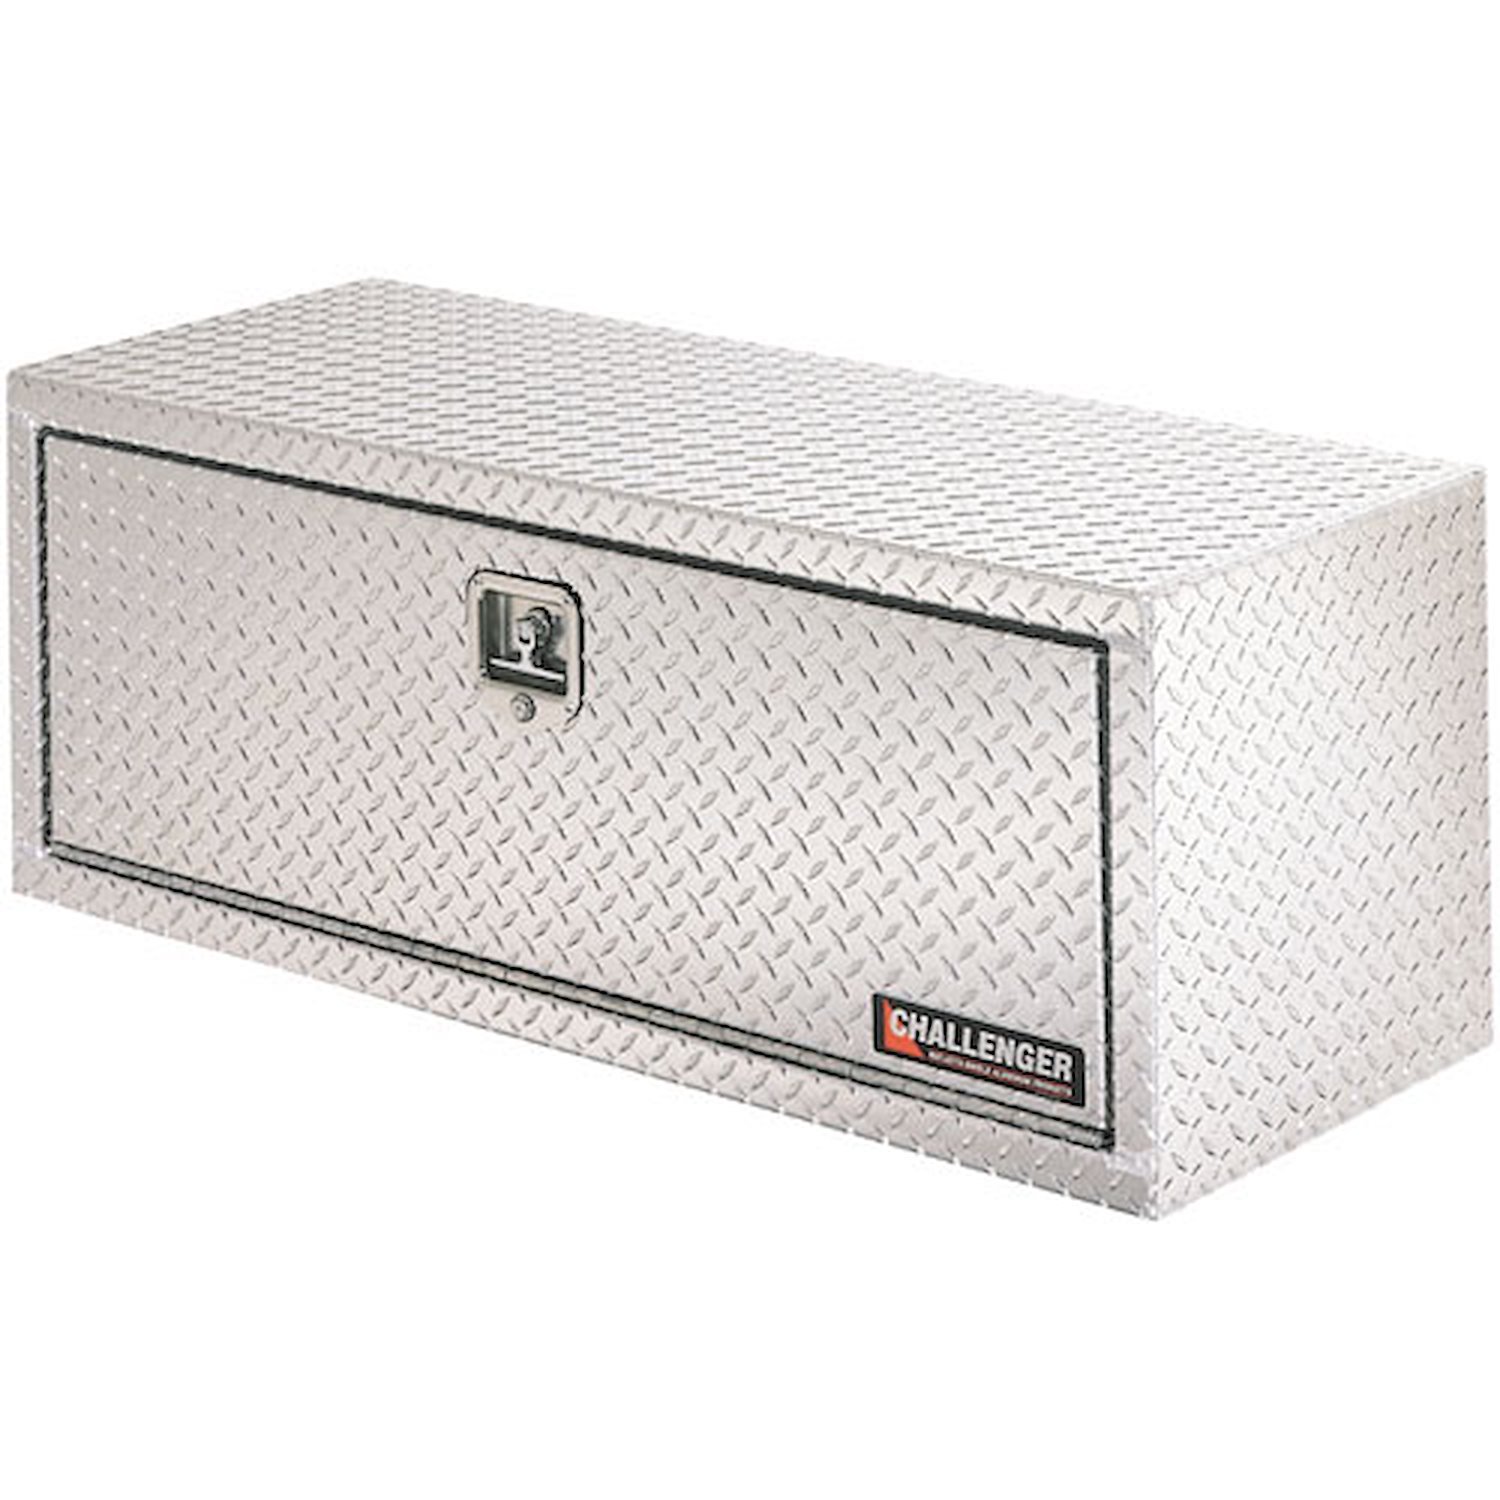 UnderBed Challenger Tool Box Length: 24"